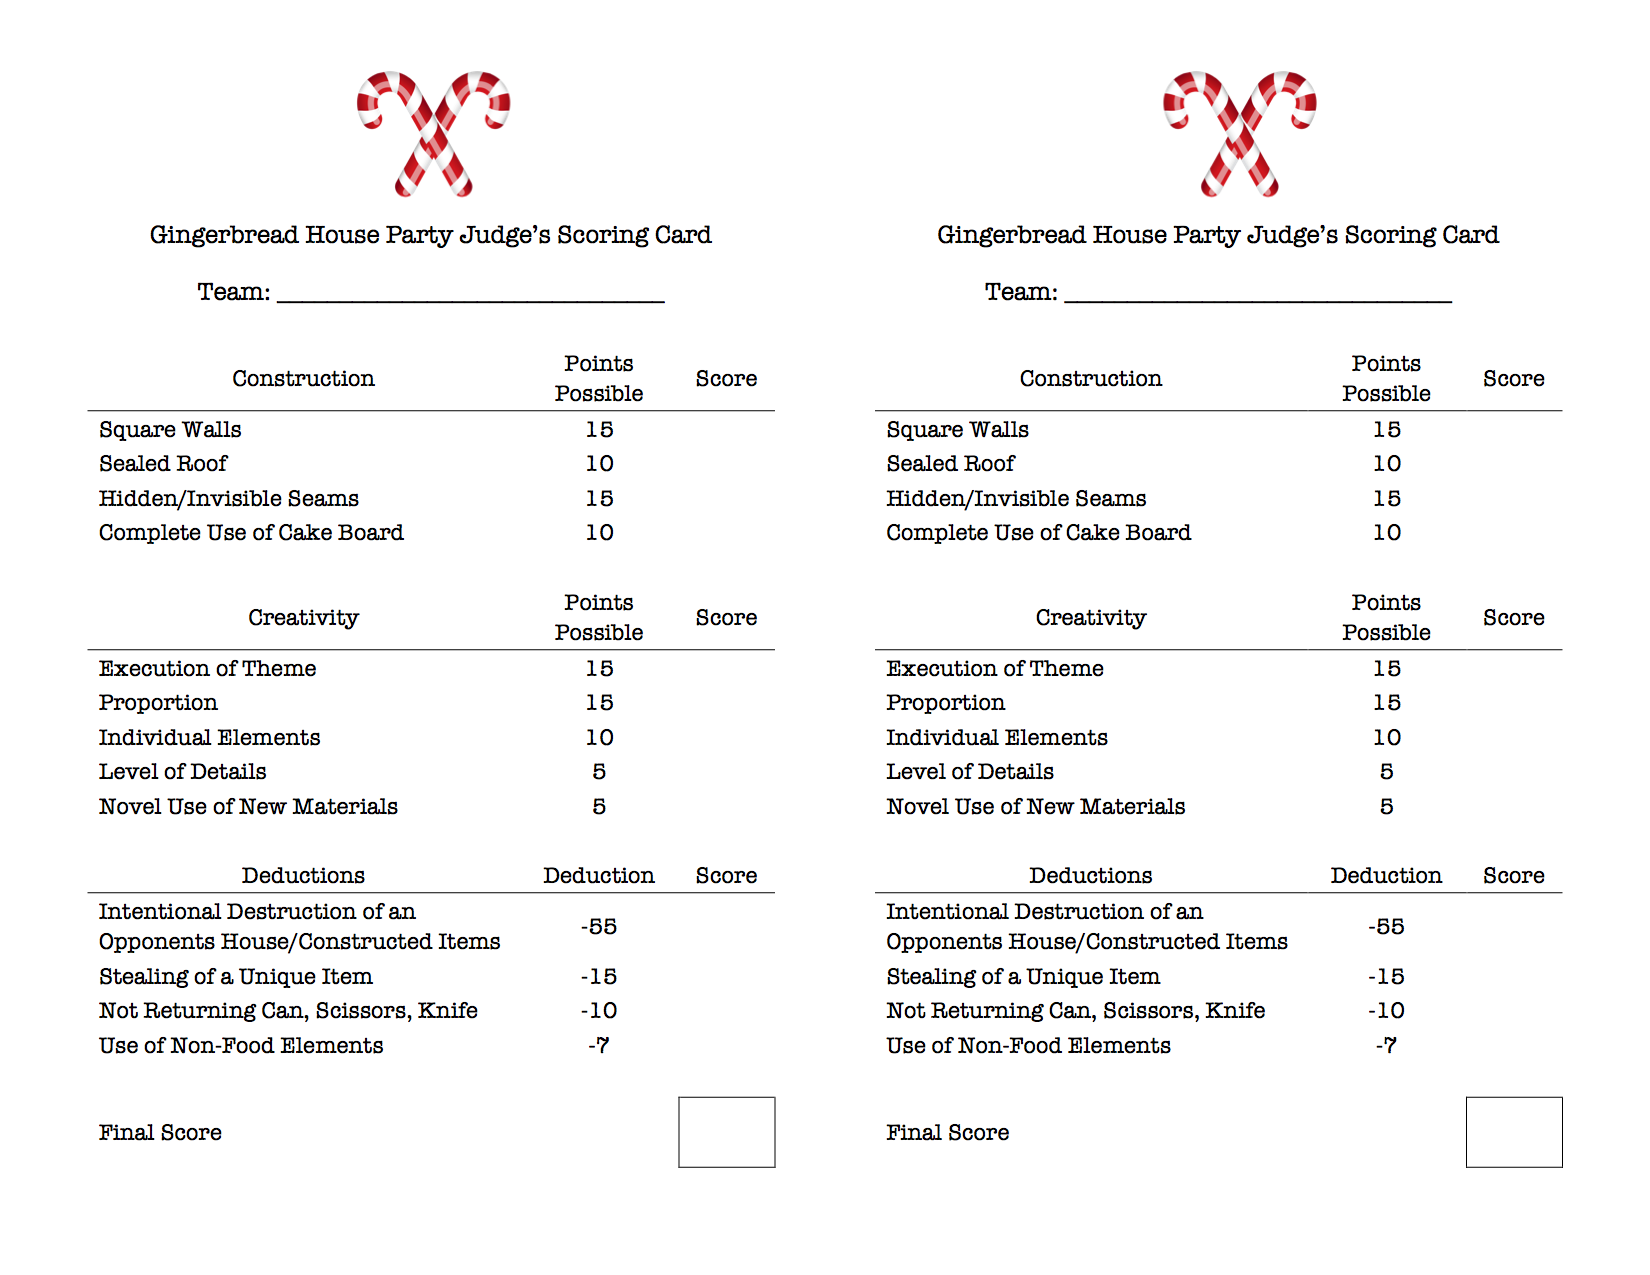 Gingerbread House Party Score Card HMH Designs